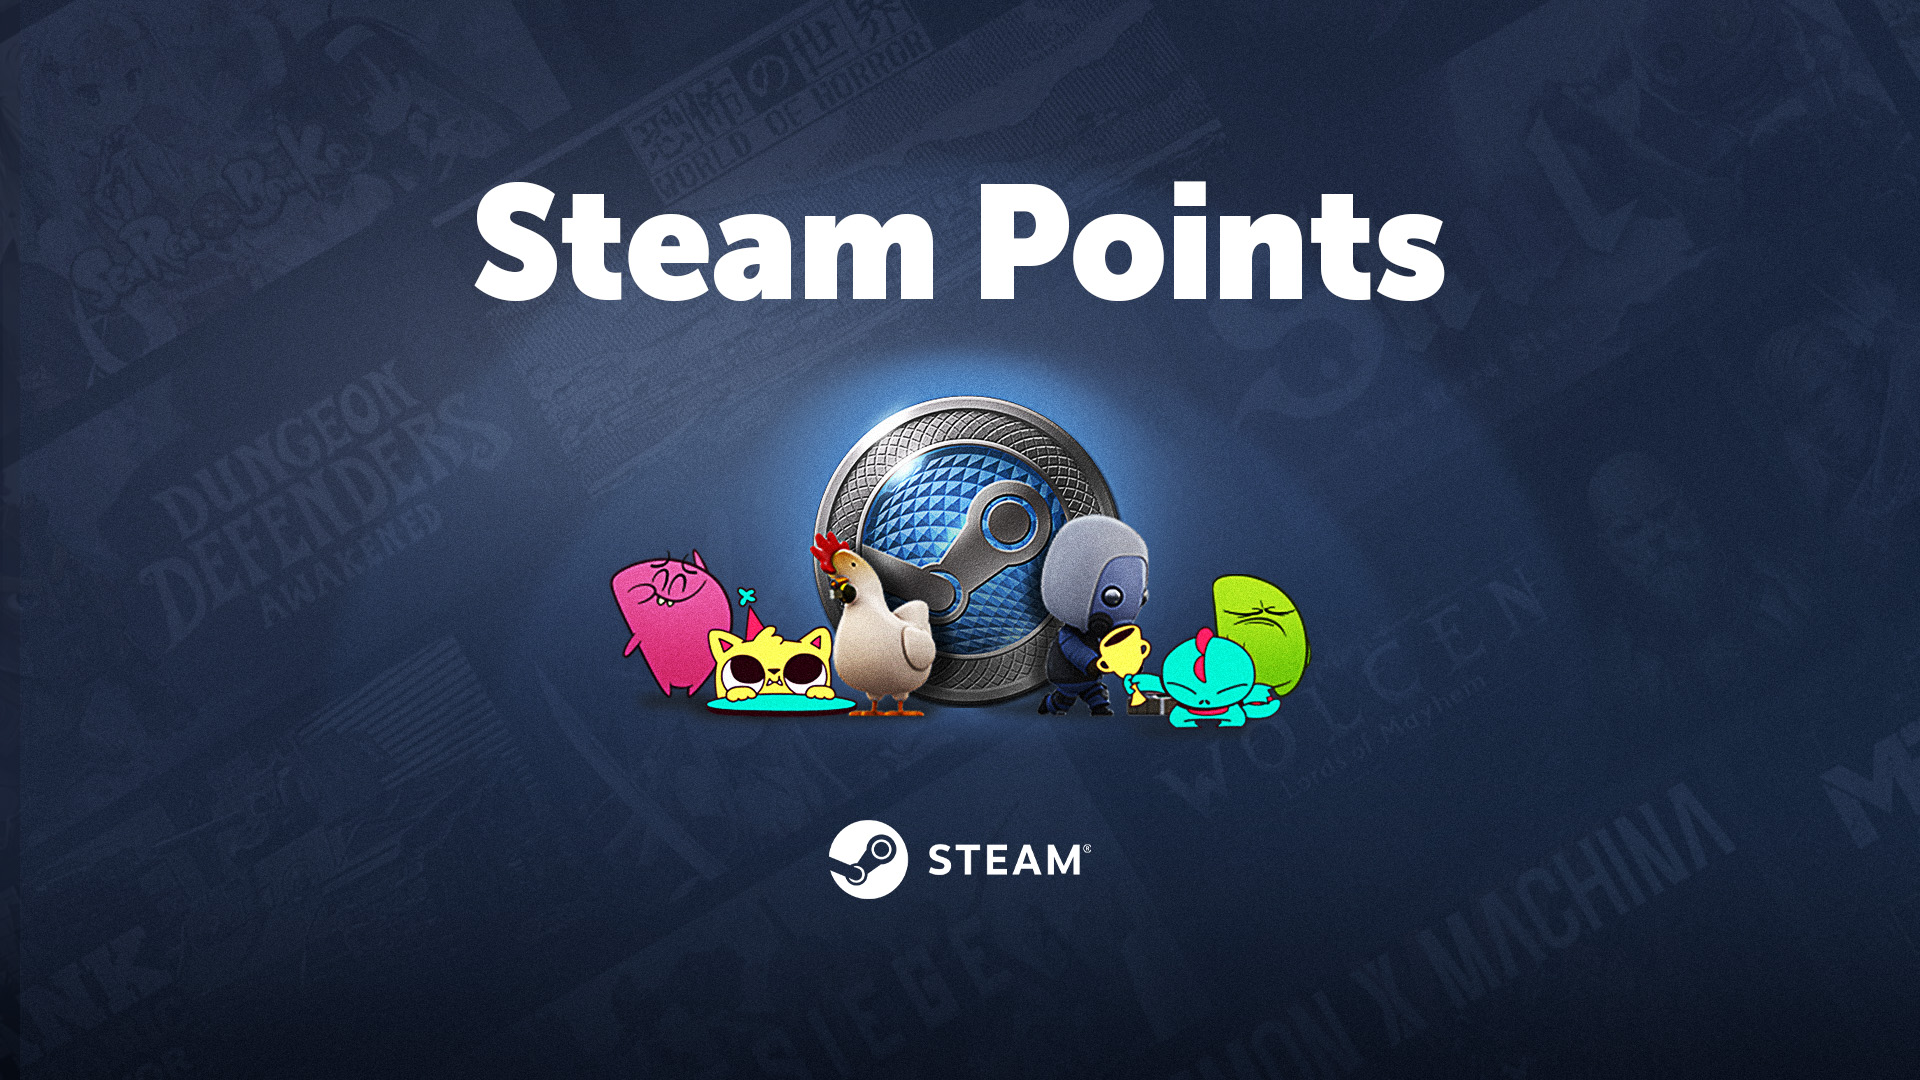 5.000 Steam Points Manual Delivery 2.54 usd